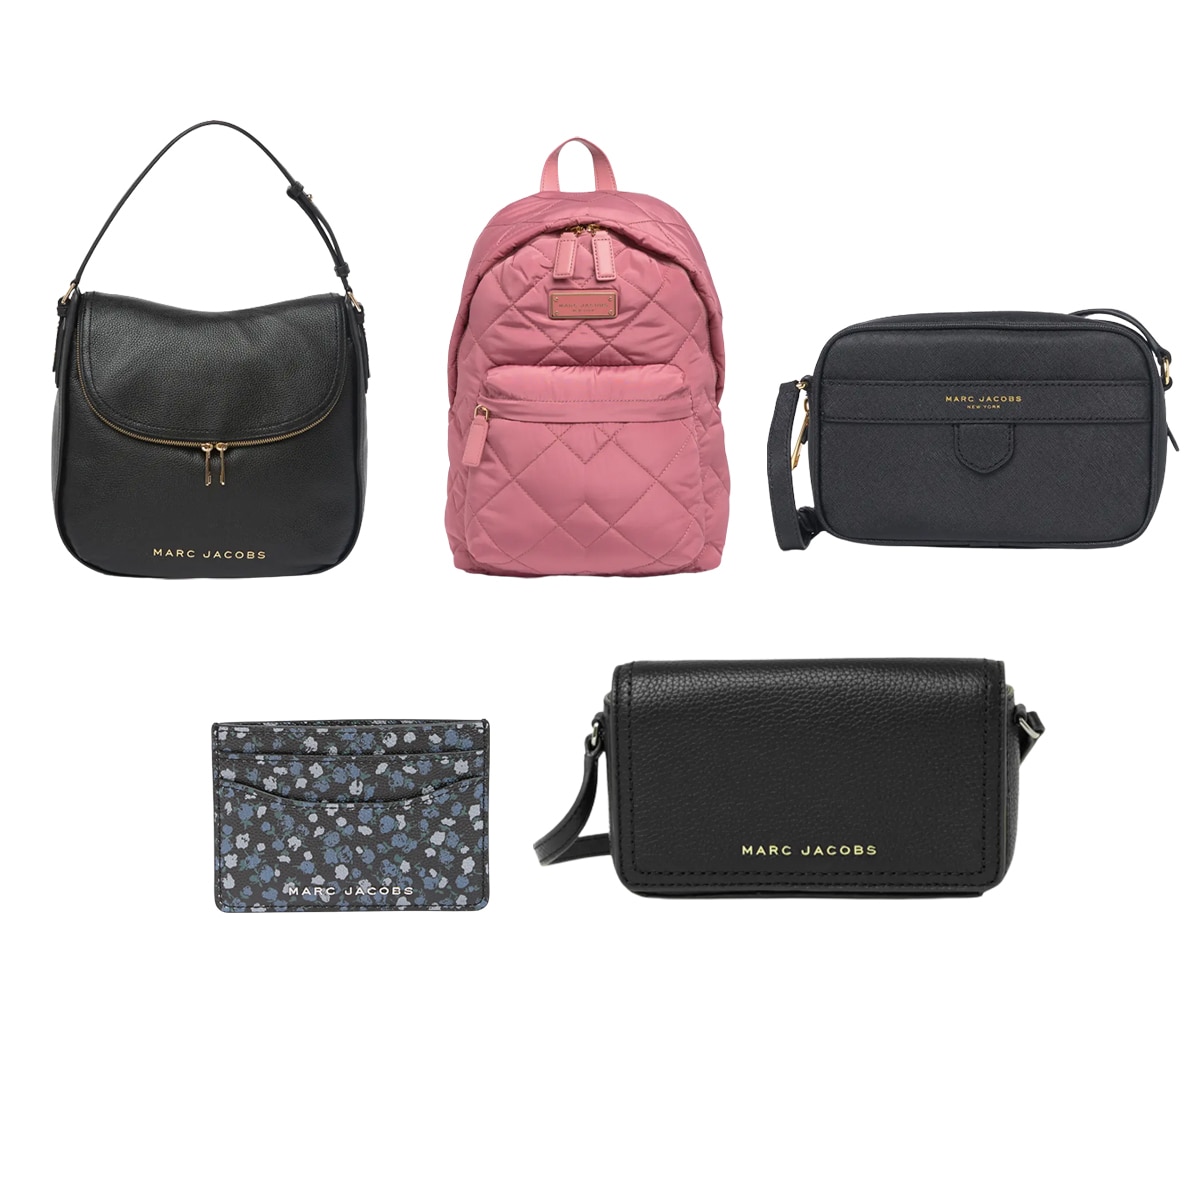 Shop handbags up to 50% off during the Nordstrom Anniversary Sale 2023